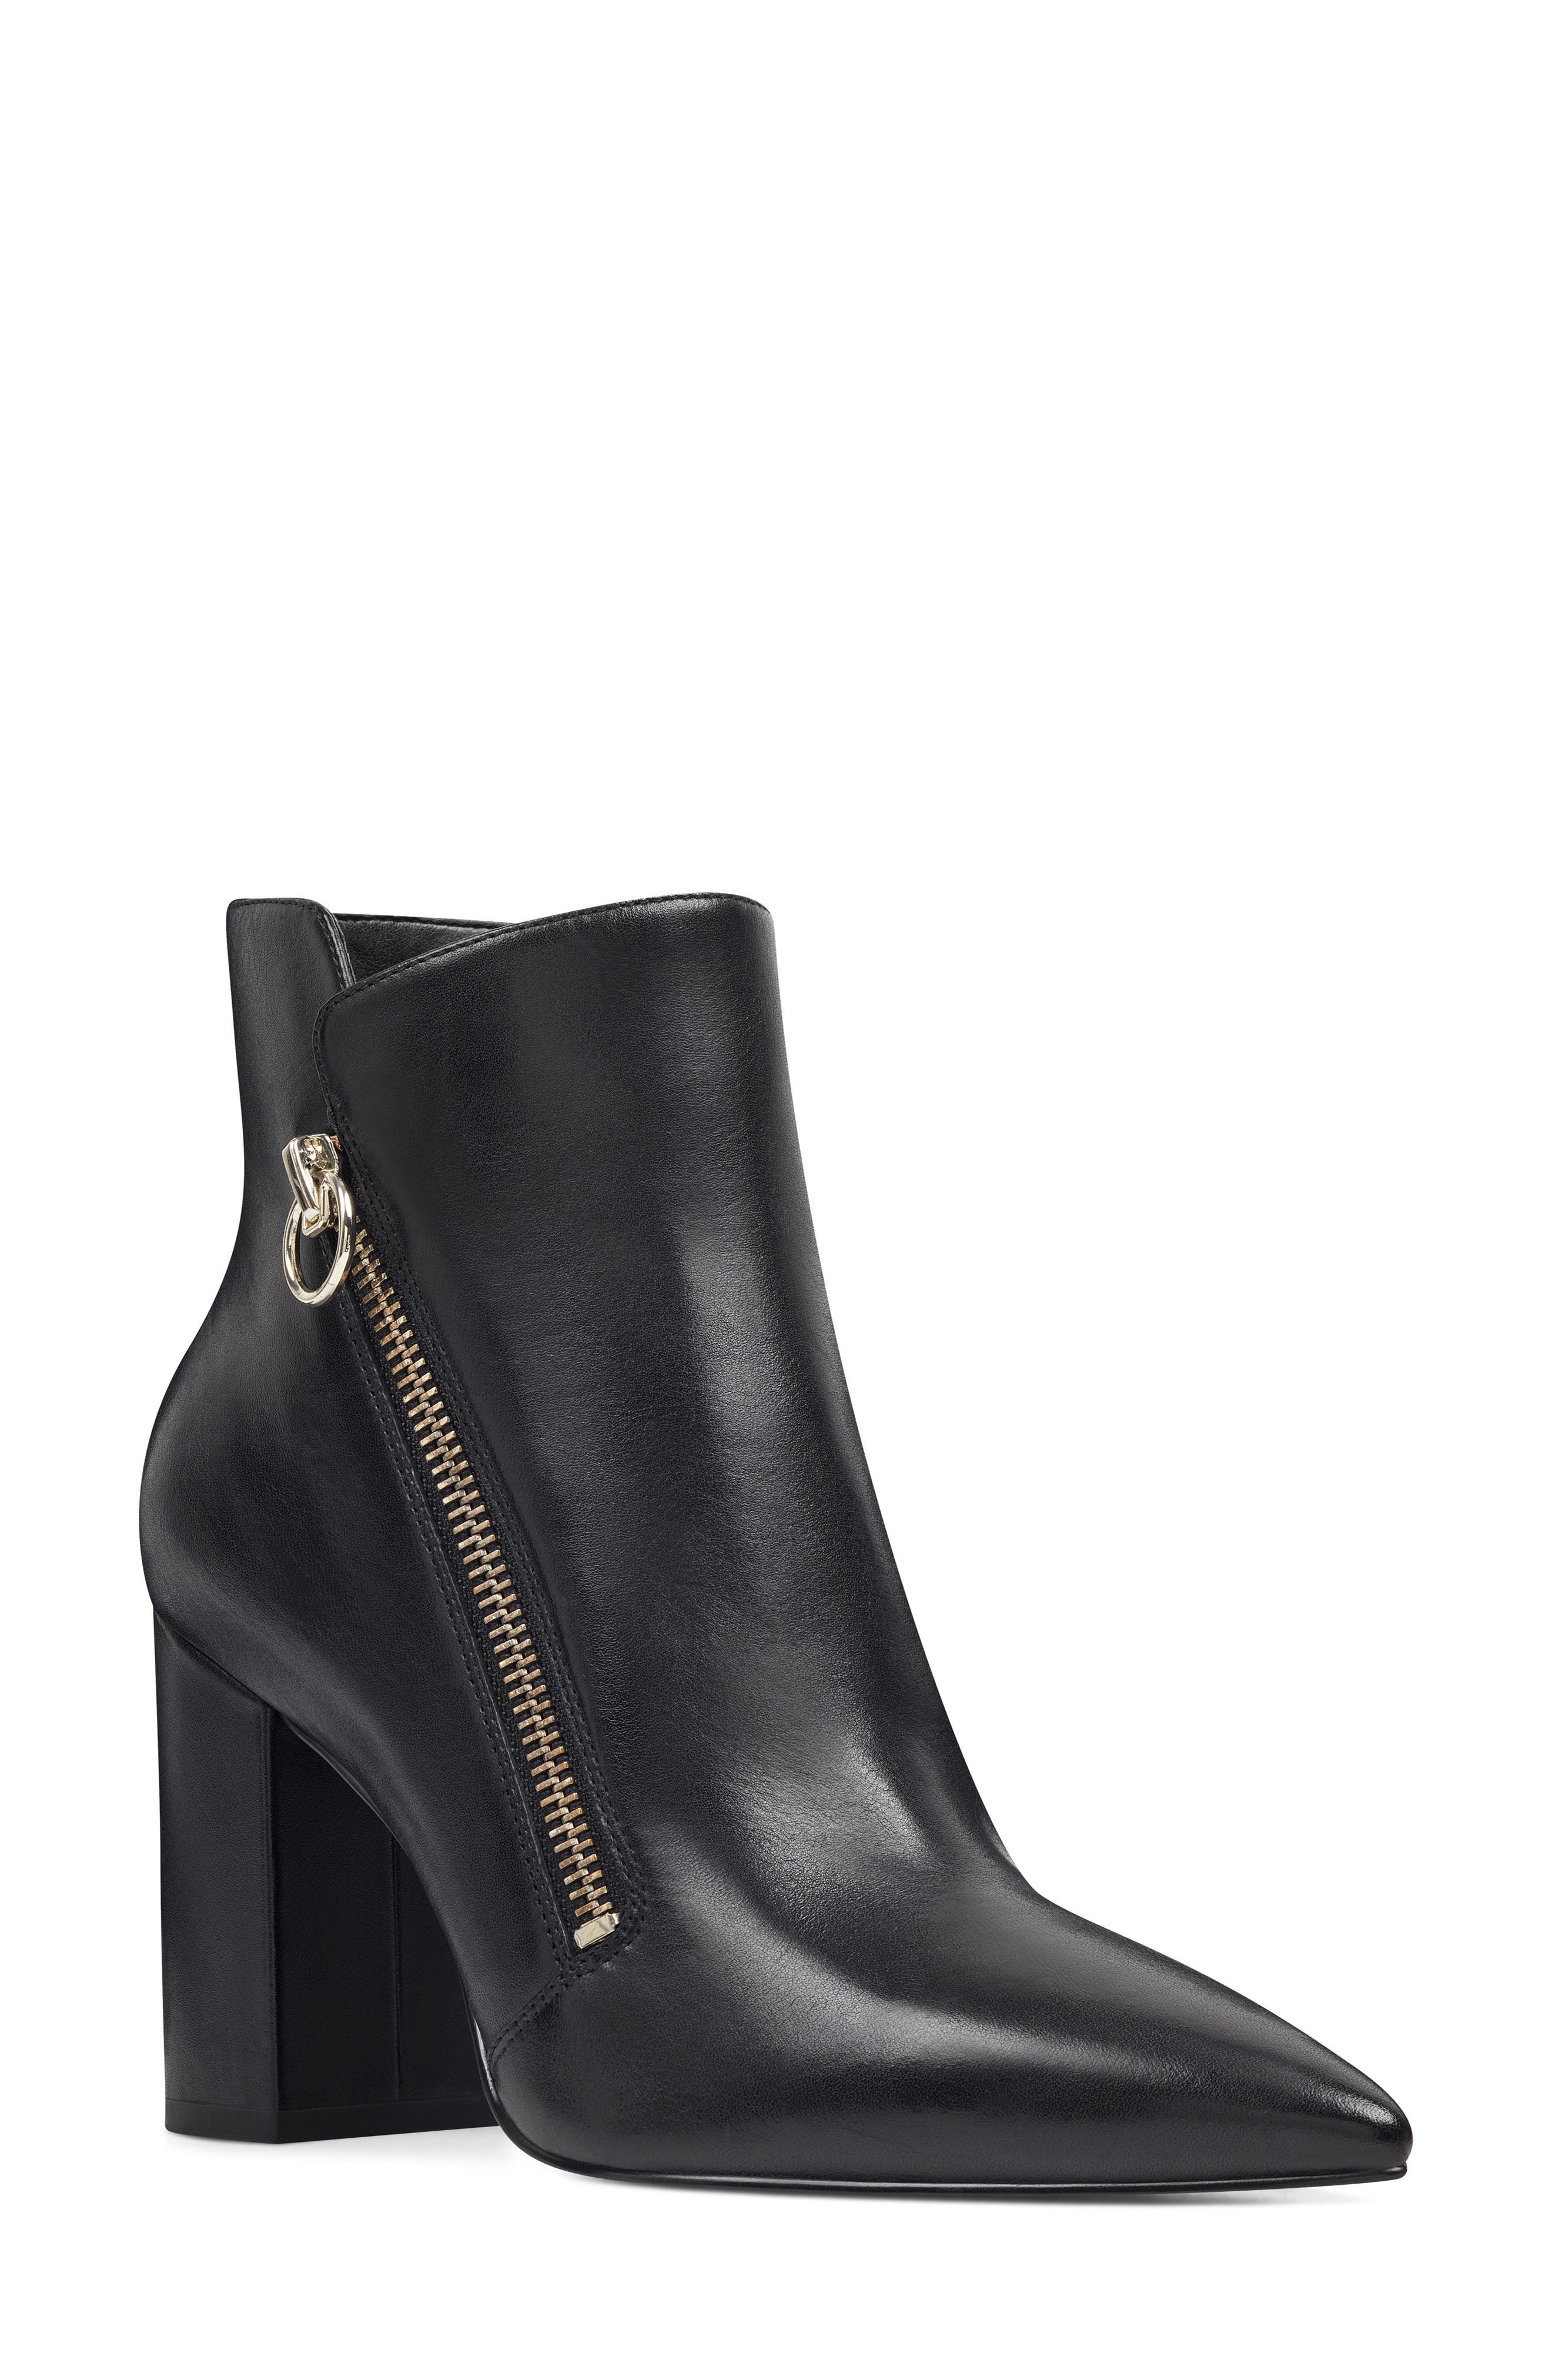 nine west russity boots